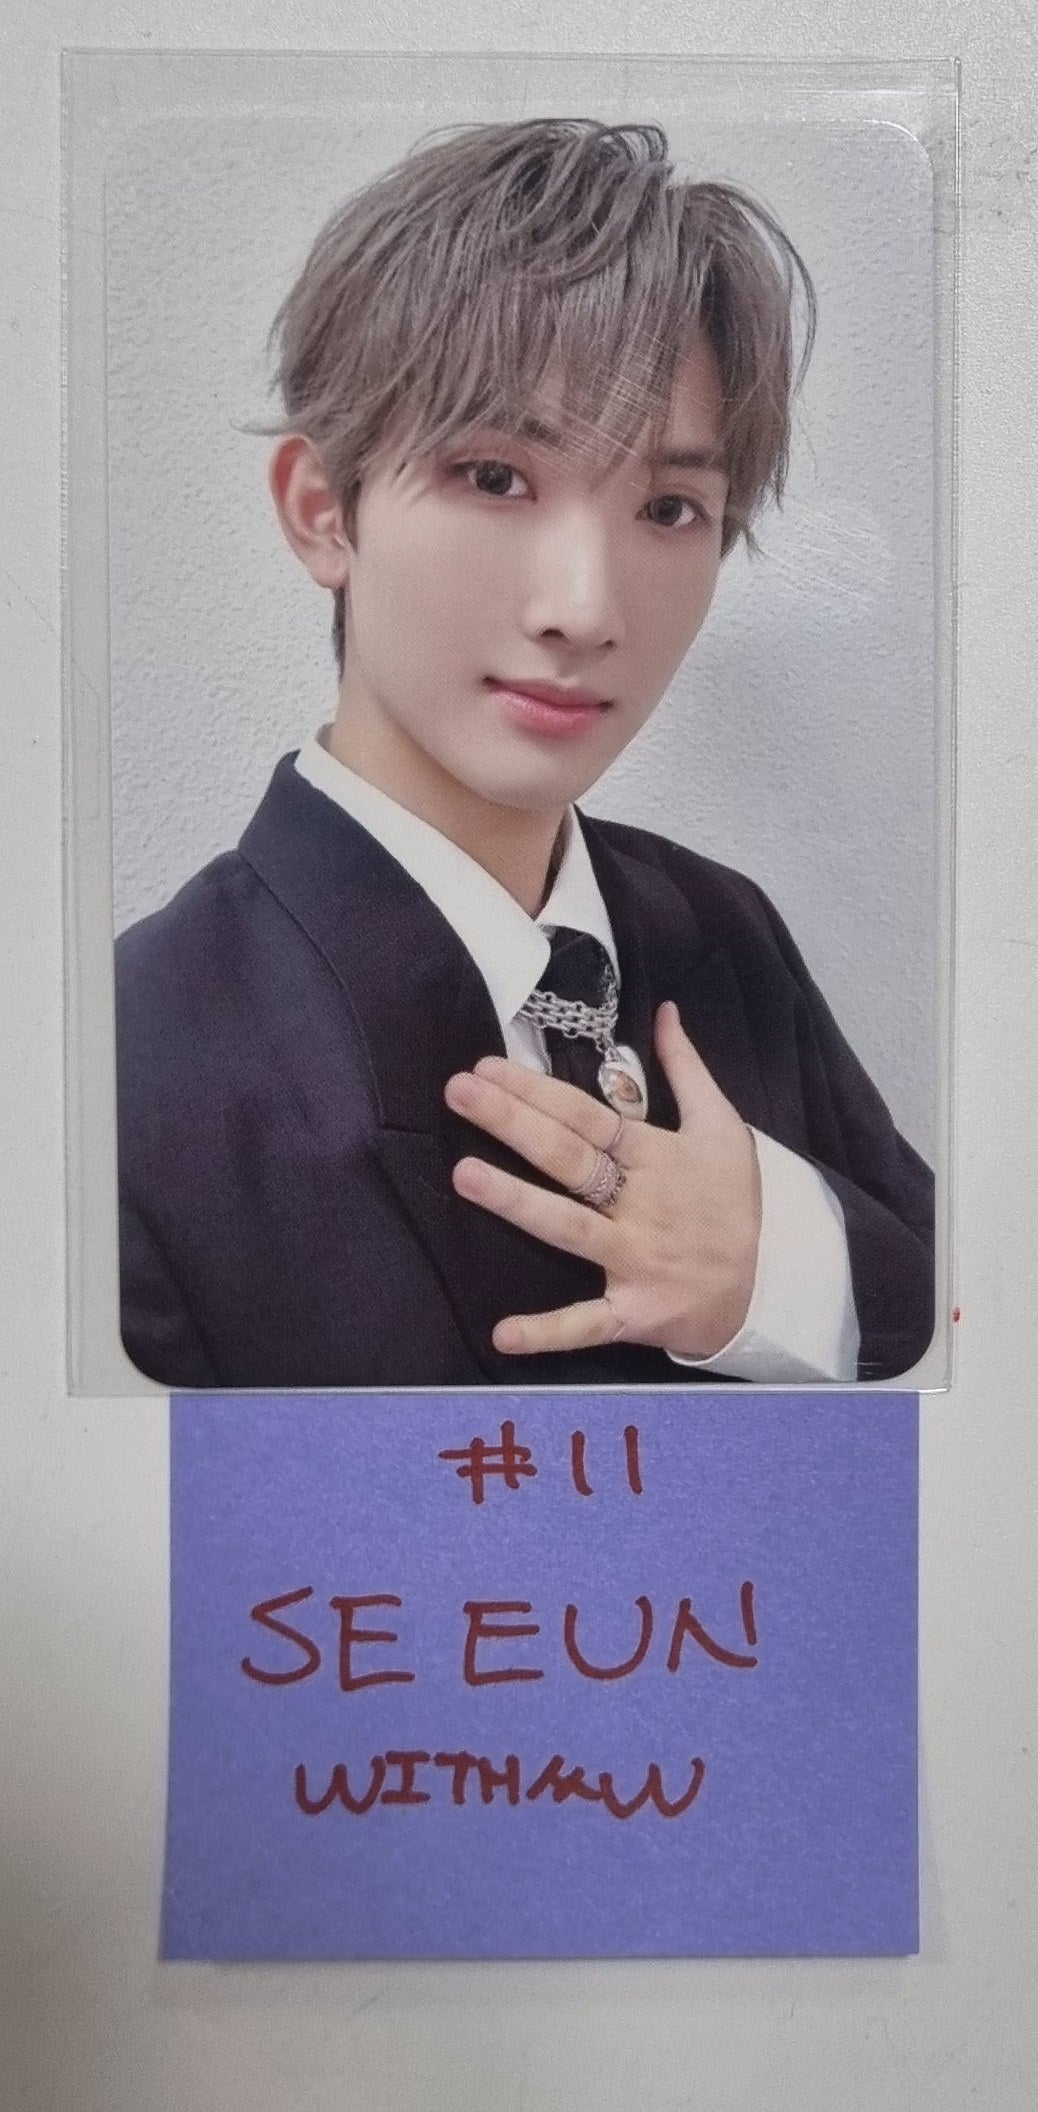 Xikers "HOUSE OF TRICKY : Trial And Error" - Withmuu Fansign Event Photocard [24.3.13]